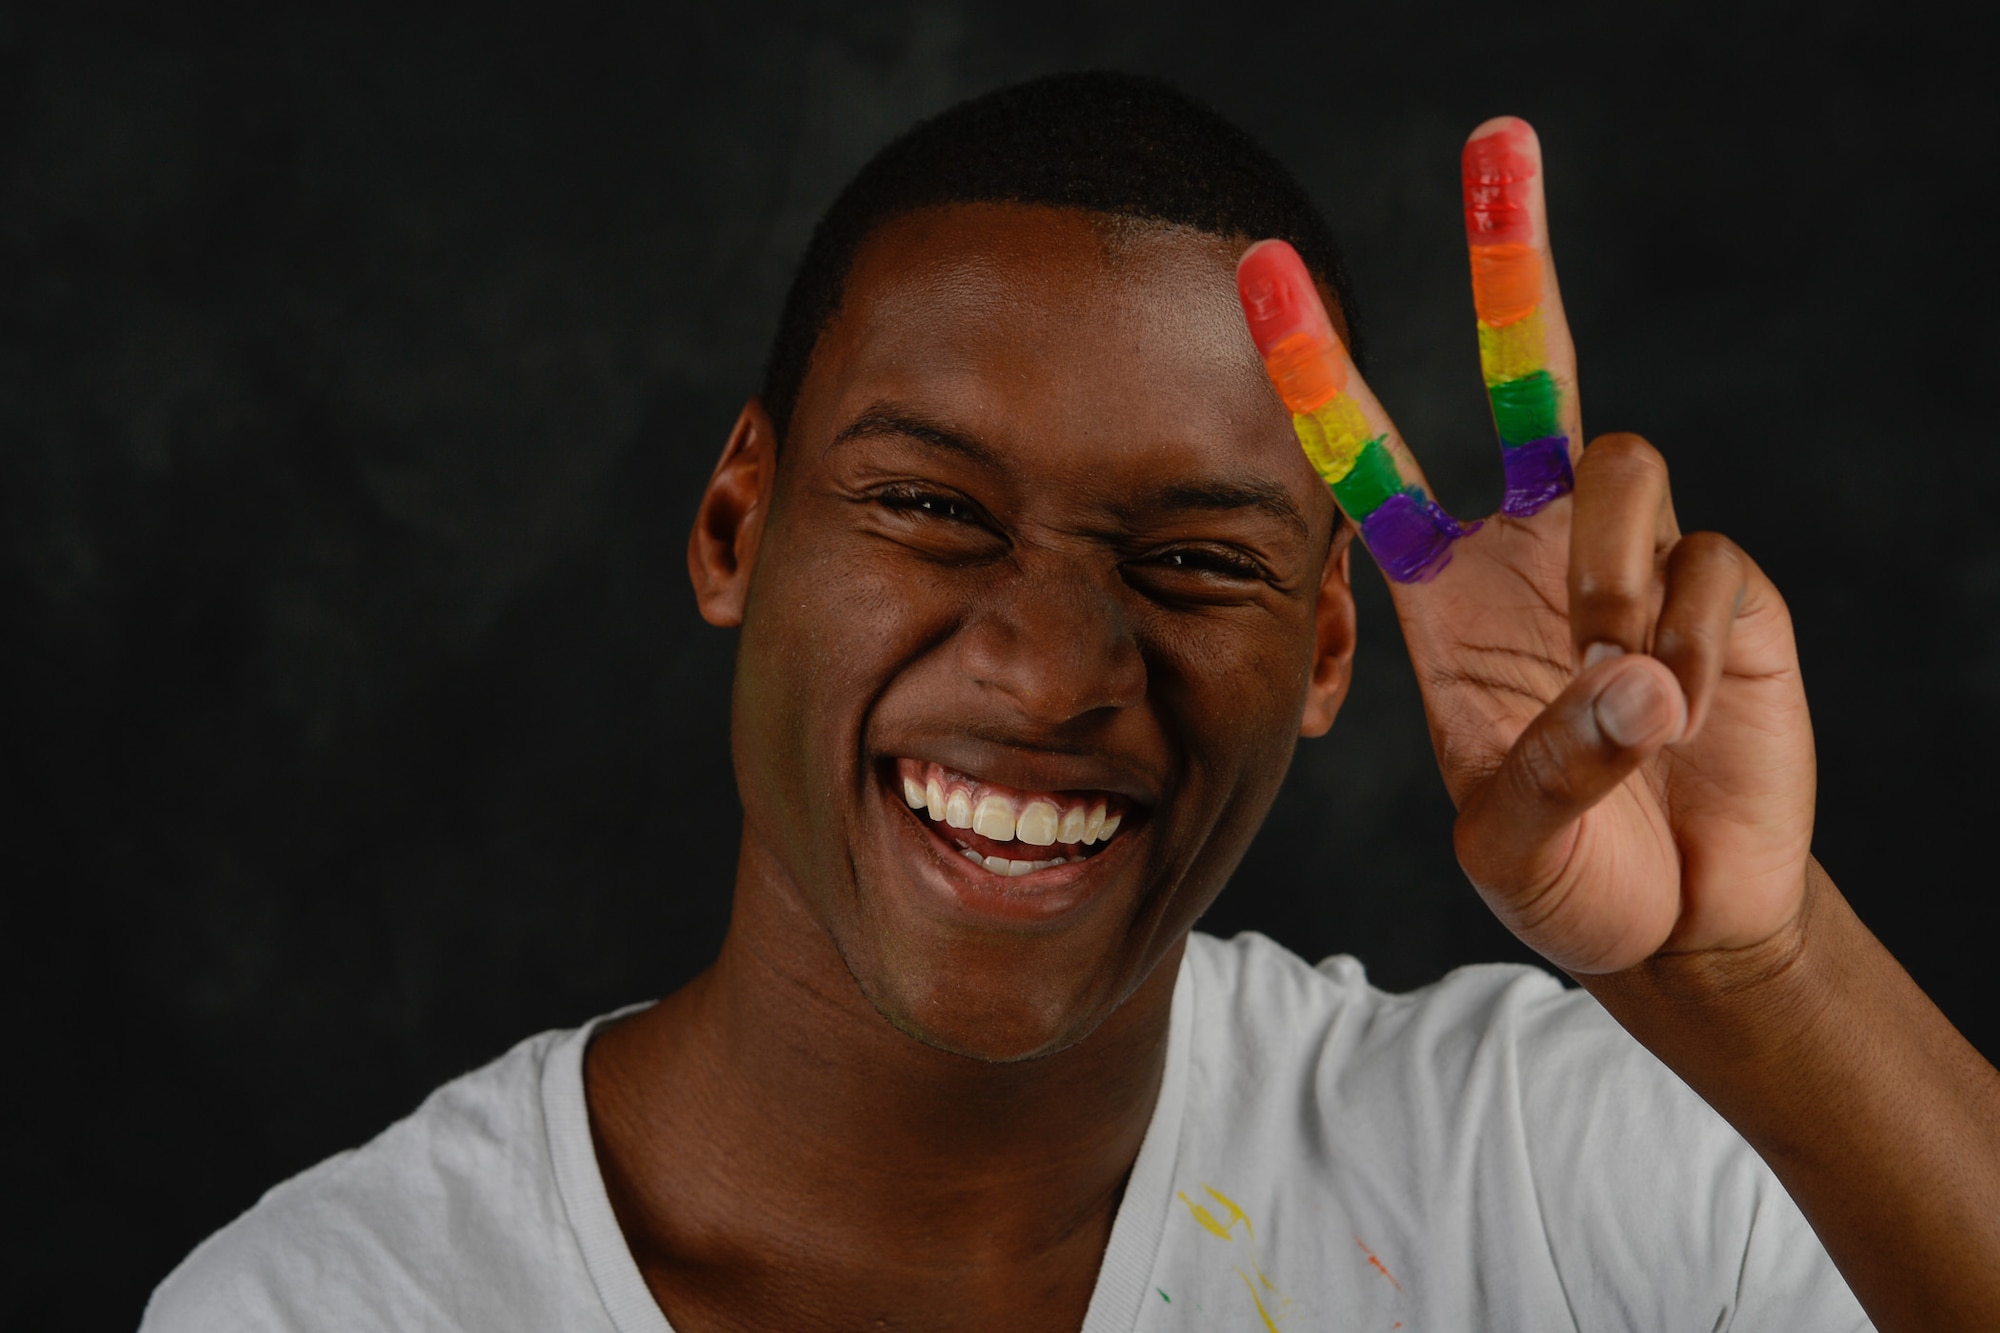 “I celebrate Pride because when I finally came out as gay, I felt myself become complete. I am able to fully express myself in ways I would have never been able to before. However, I am more than just gay. I am goofy regular ‘ole guy and a whole bunch other things that sums me up!” – U.S. Air Force Airman 1st Class Keith Rowe, 86th Logistics Readiness Squadron traffic management journeyman 